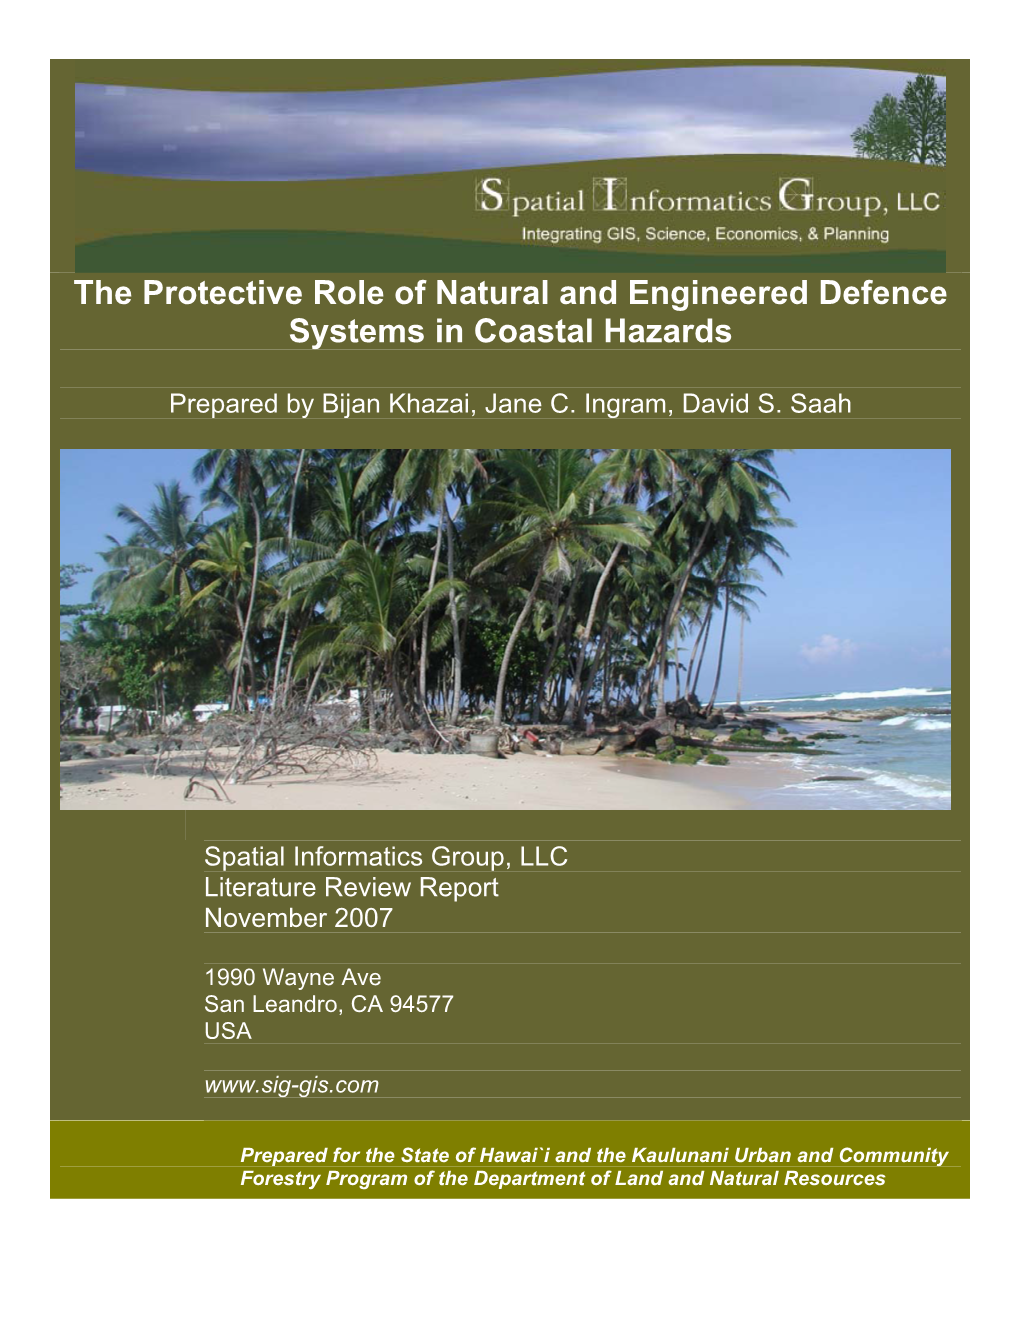 The Protective Role of Natural and Engineered Defence Systems in Coastal Hazards